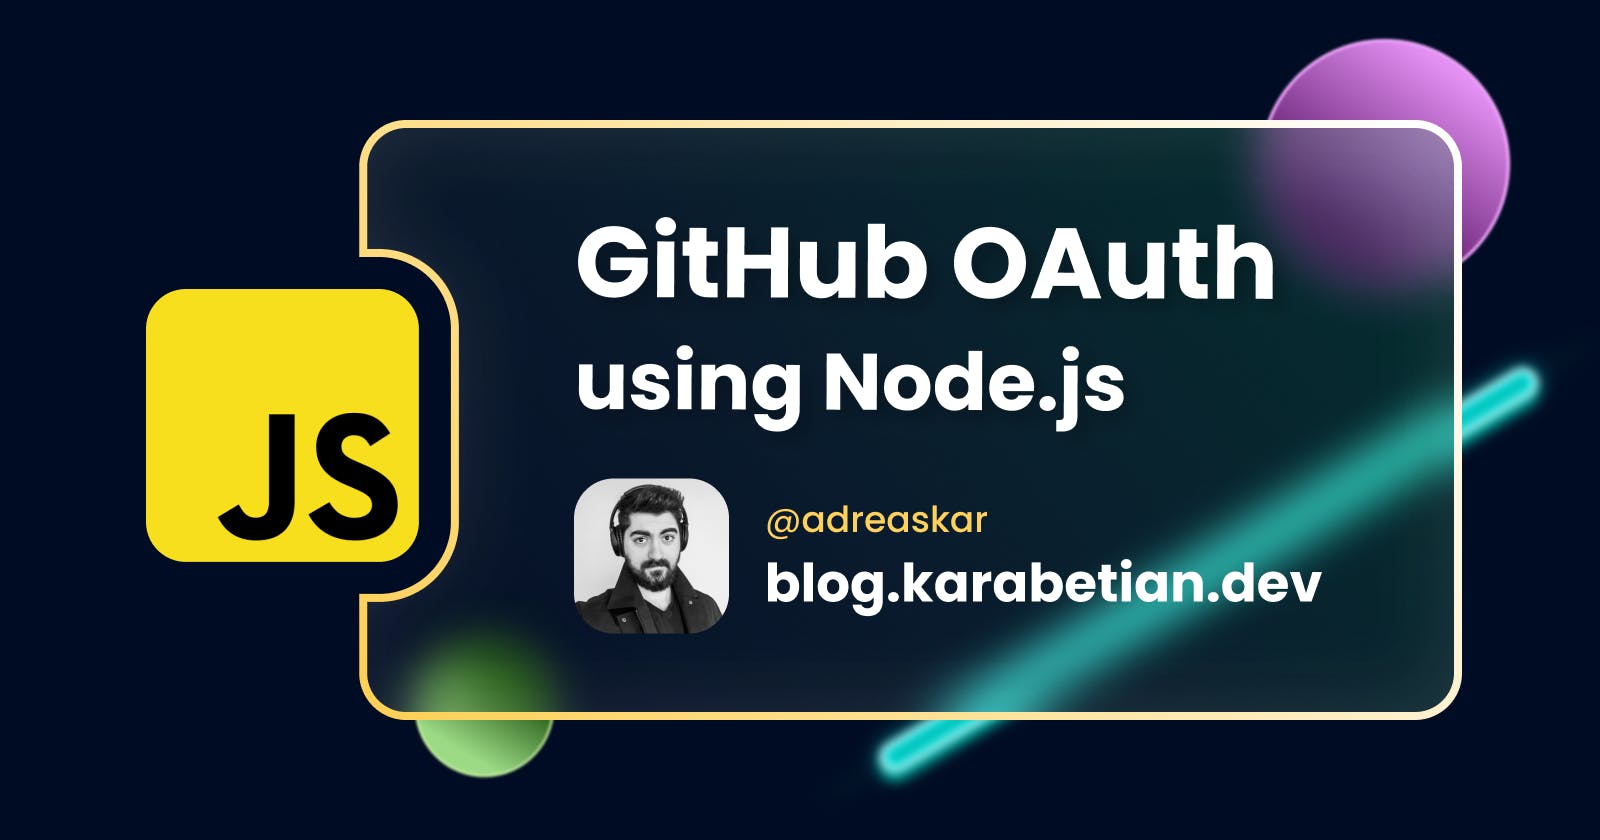 How to add GitHub OAuth to your Node.js application 🔐